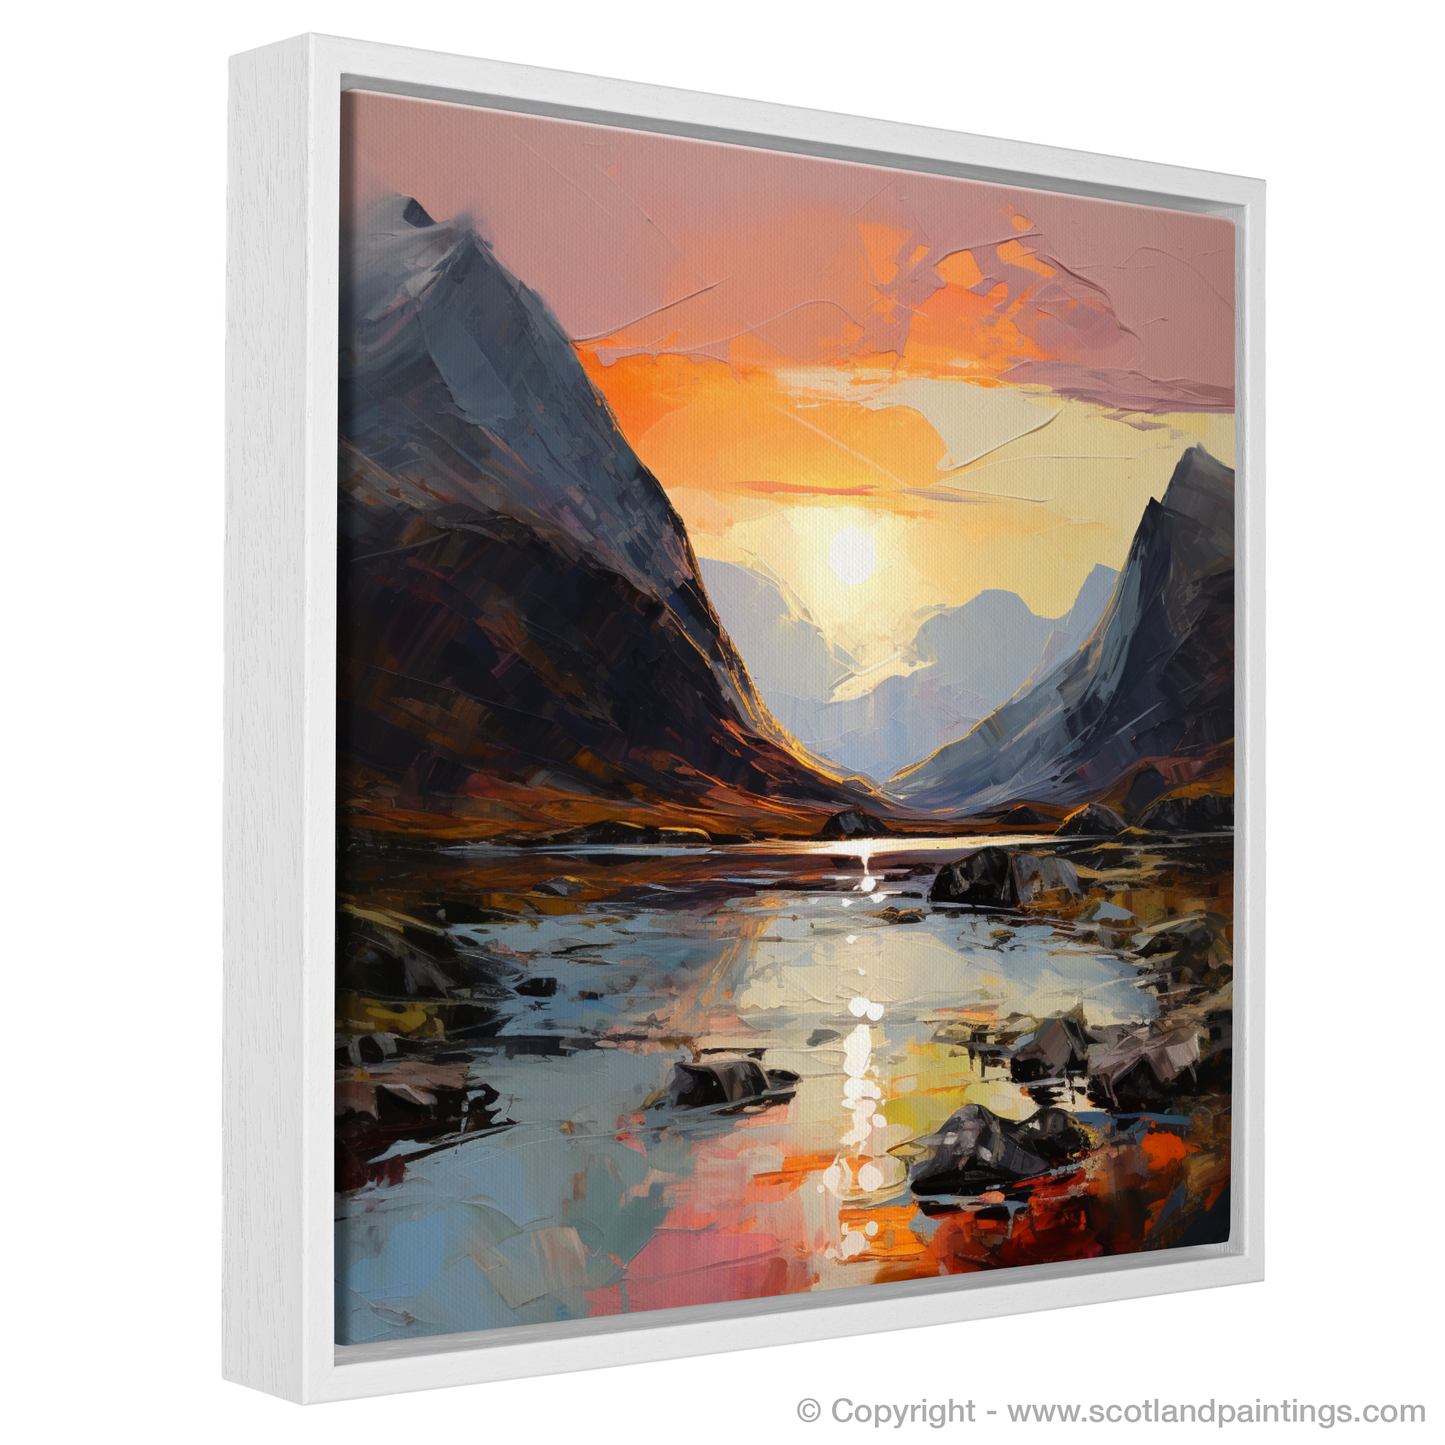 Painting and Art Print of Sunset glow in Glencoe entitled "Sunset Embers Over Glencoe Highlands".